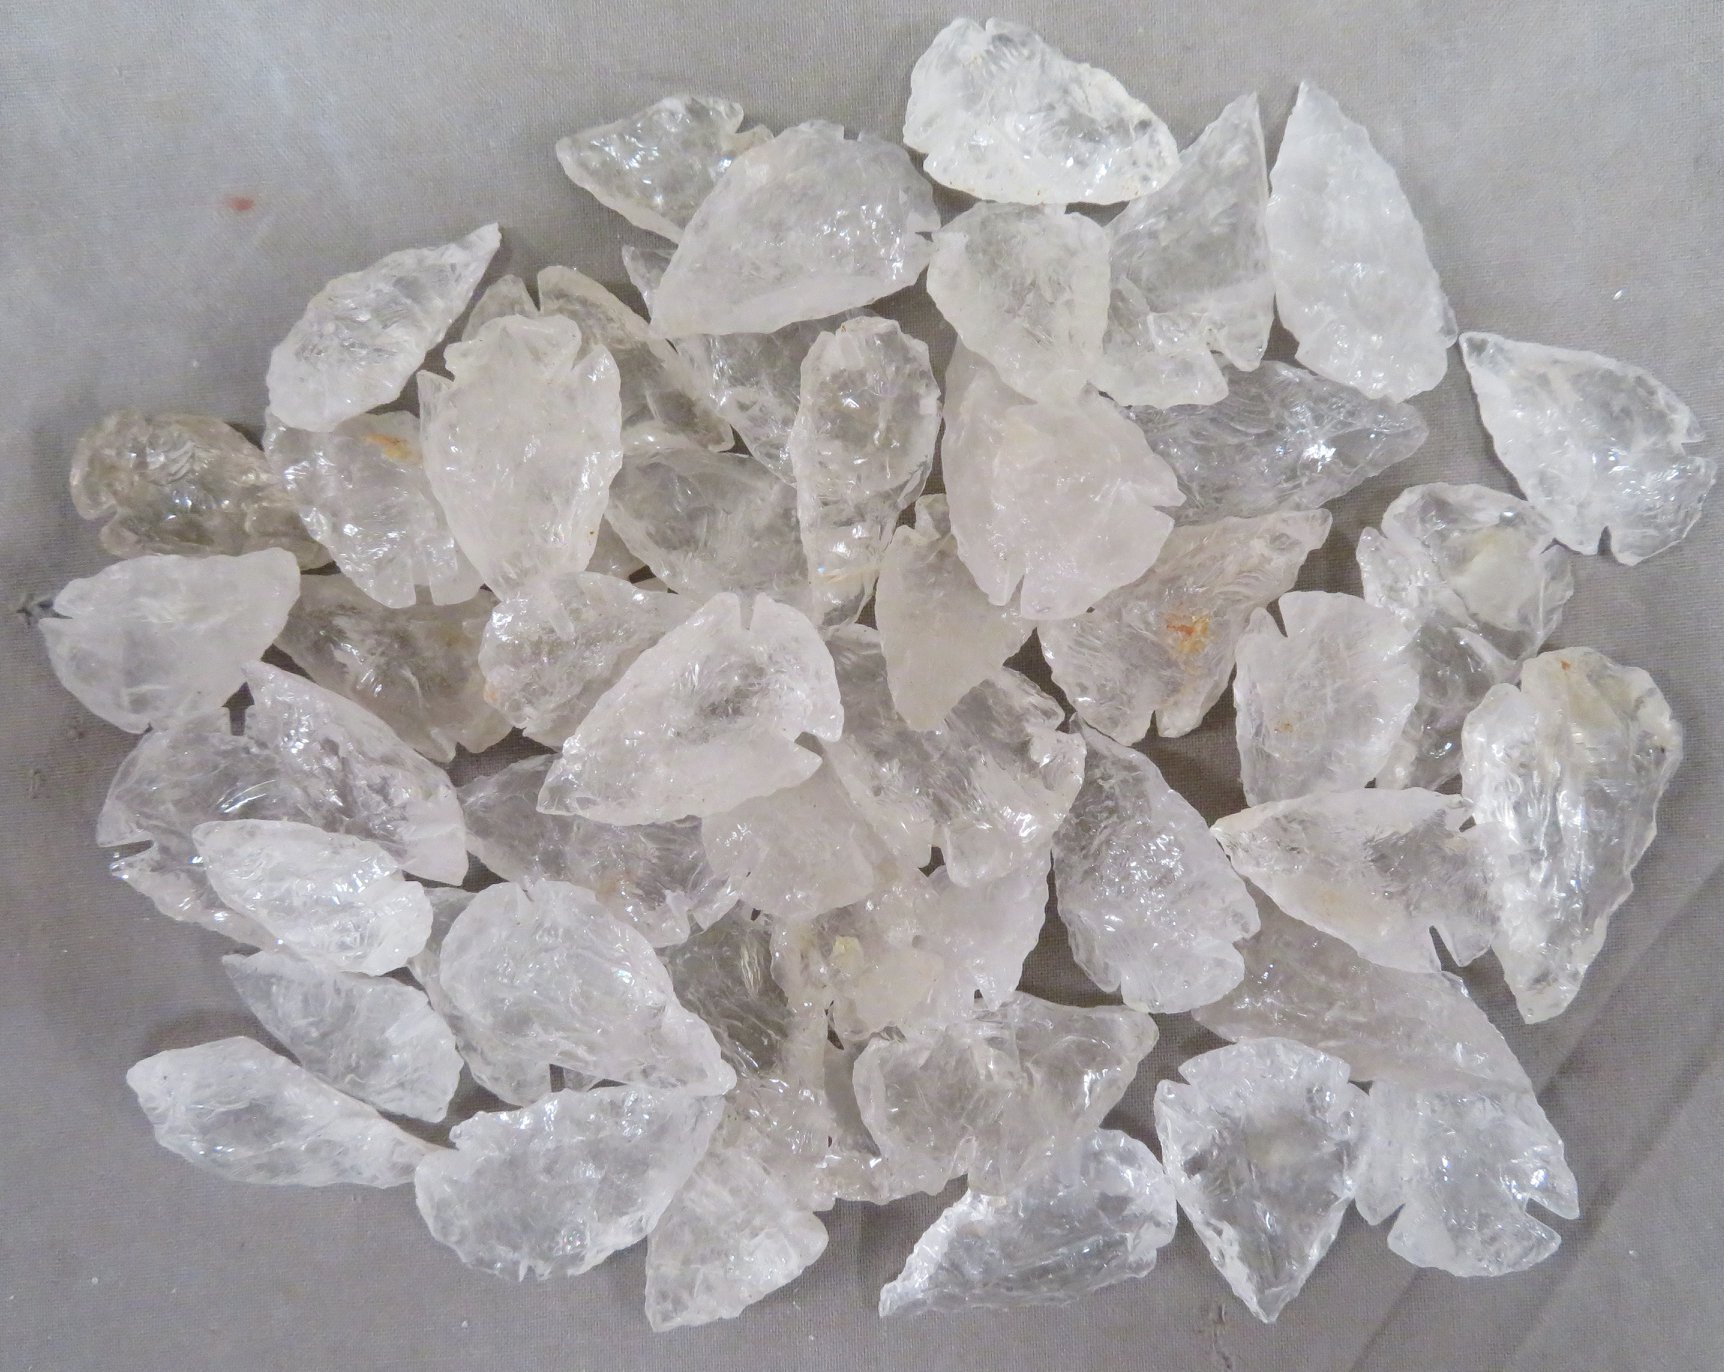 Clear Quartz Arrowheads-Sold in packs of 50